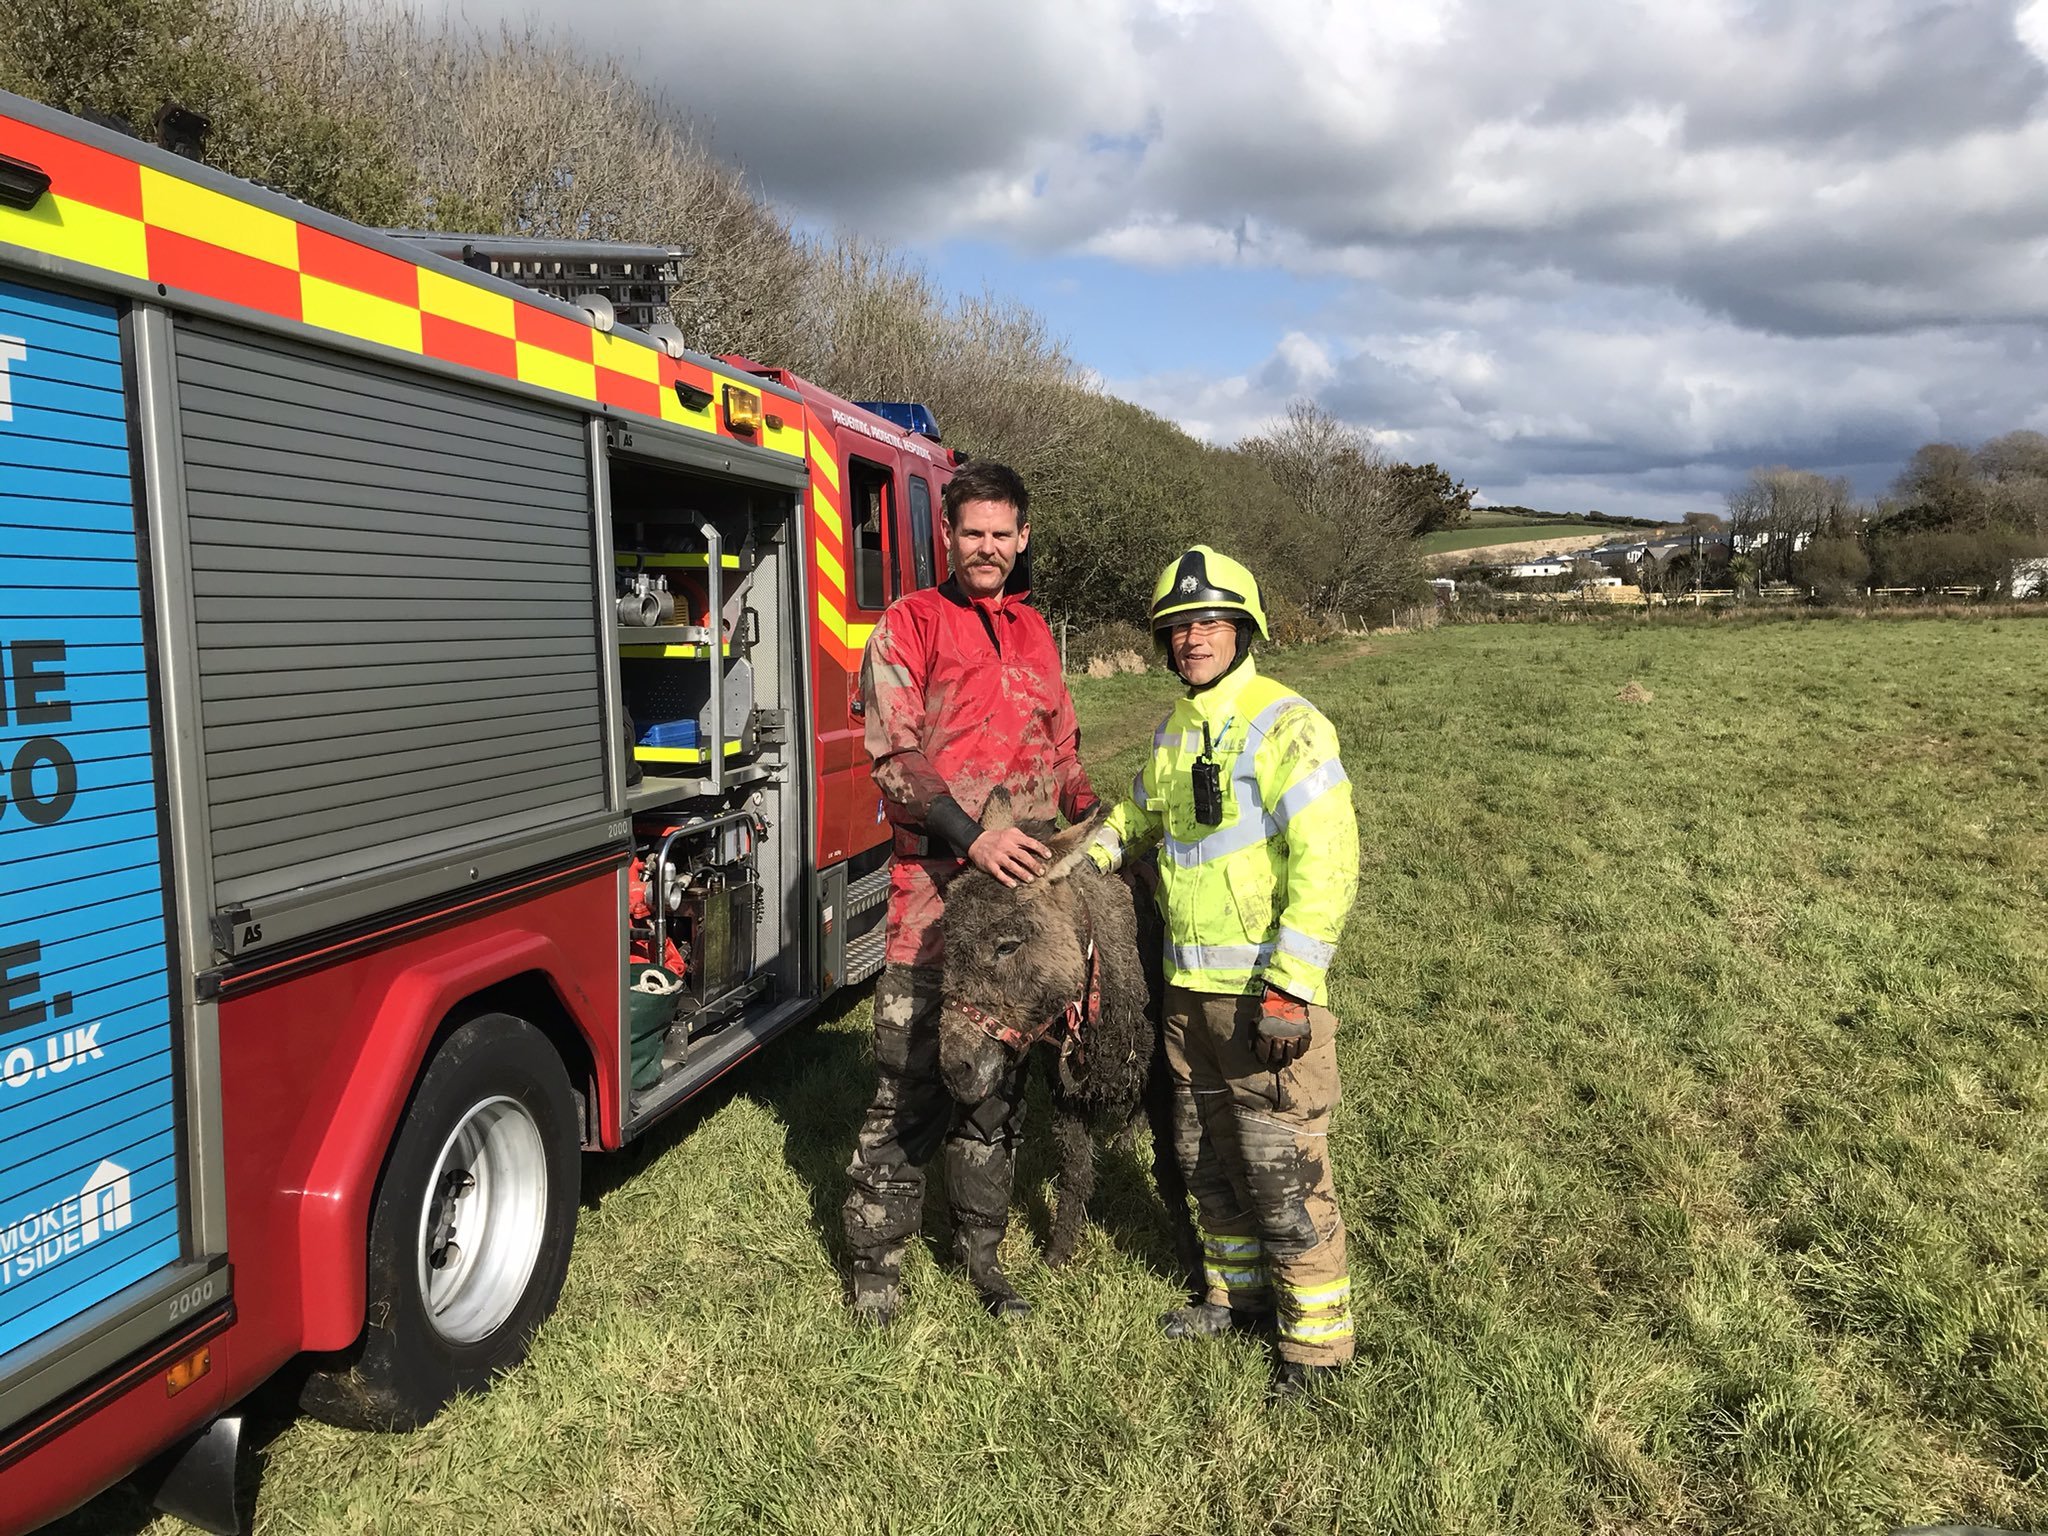 Firefighters with a safe donkey Patrick after the rescue